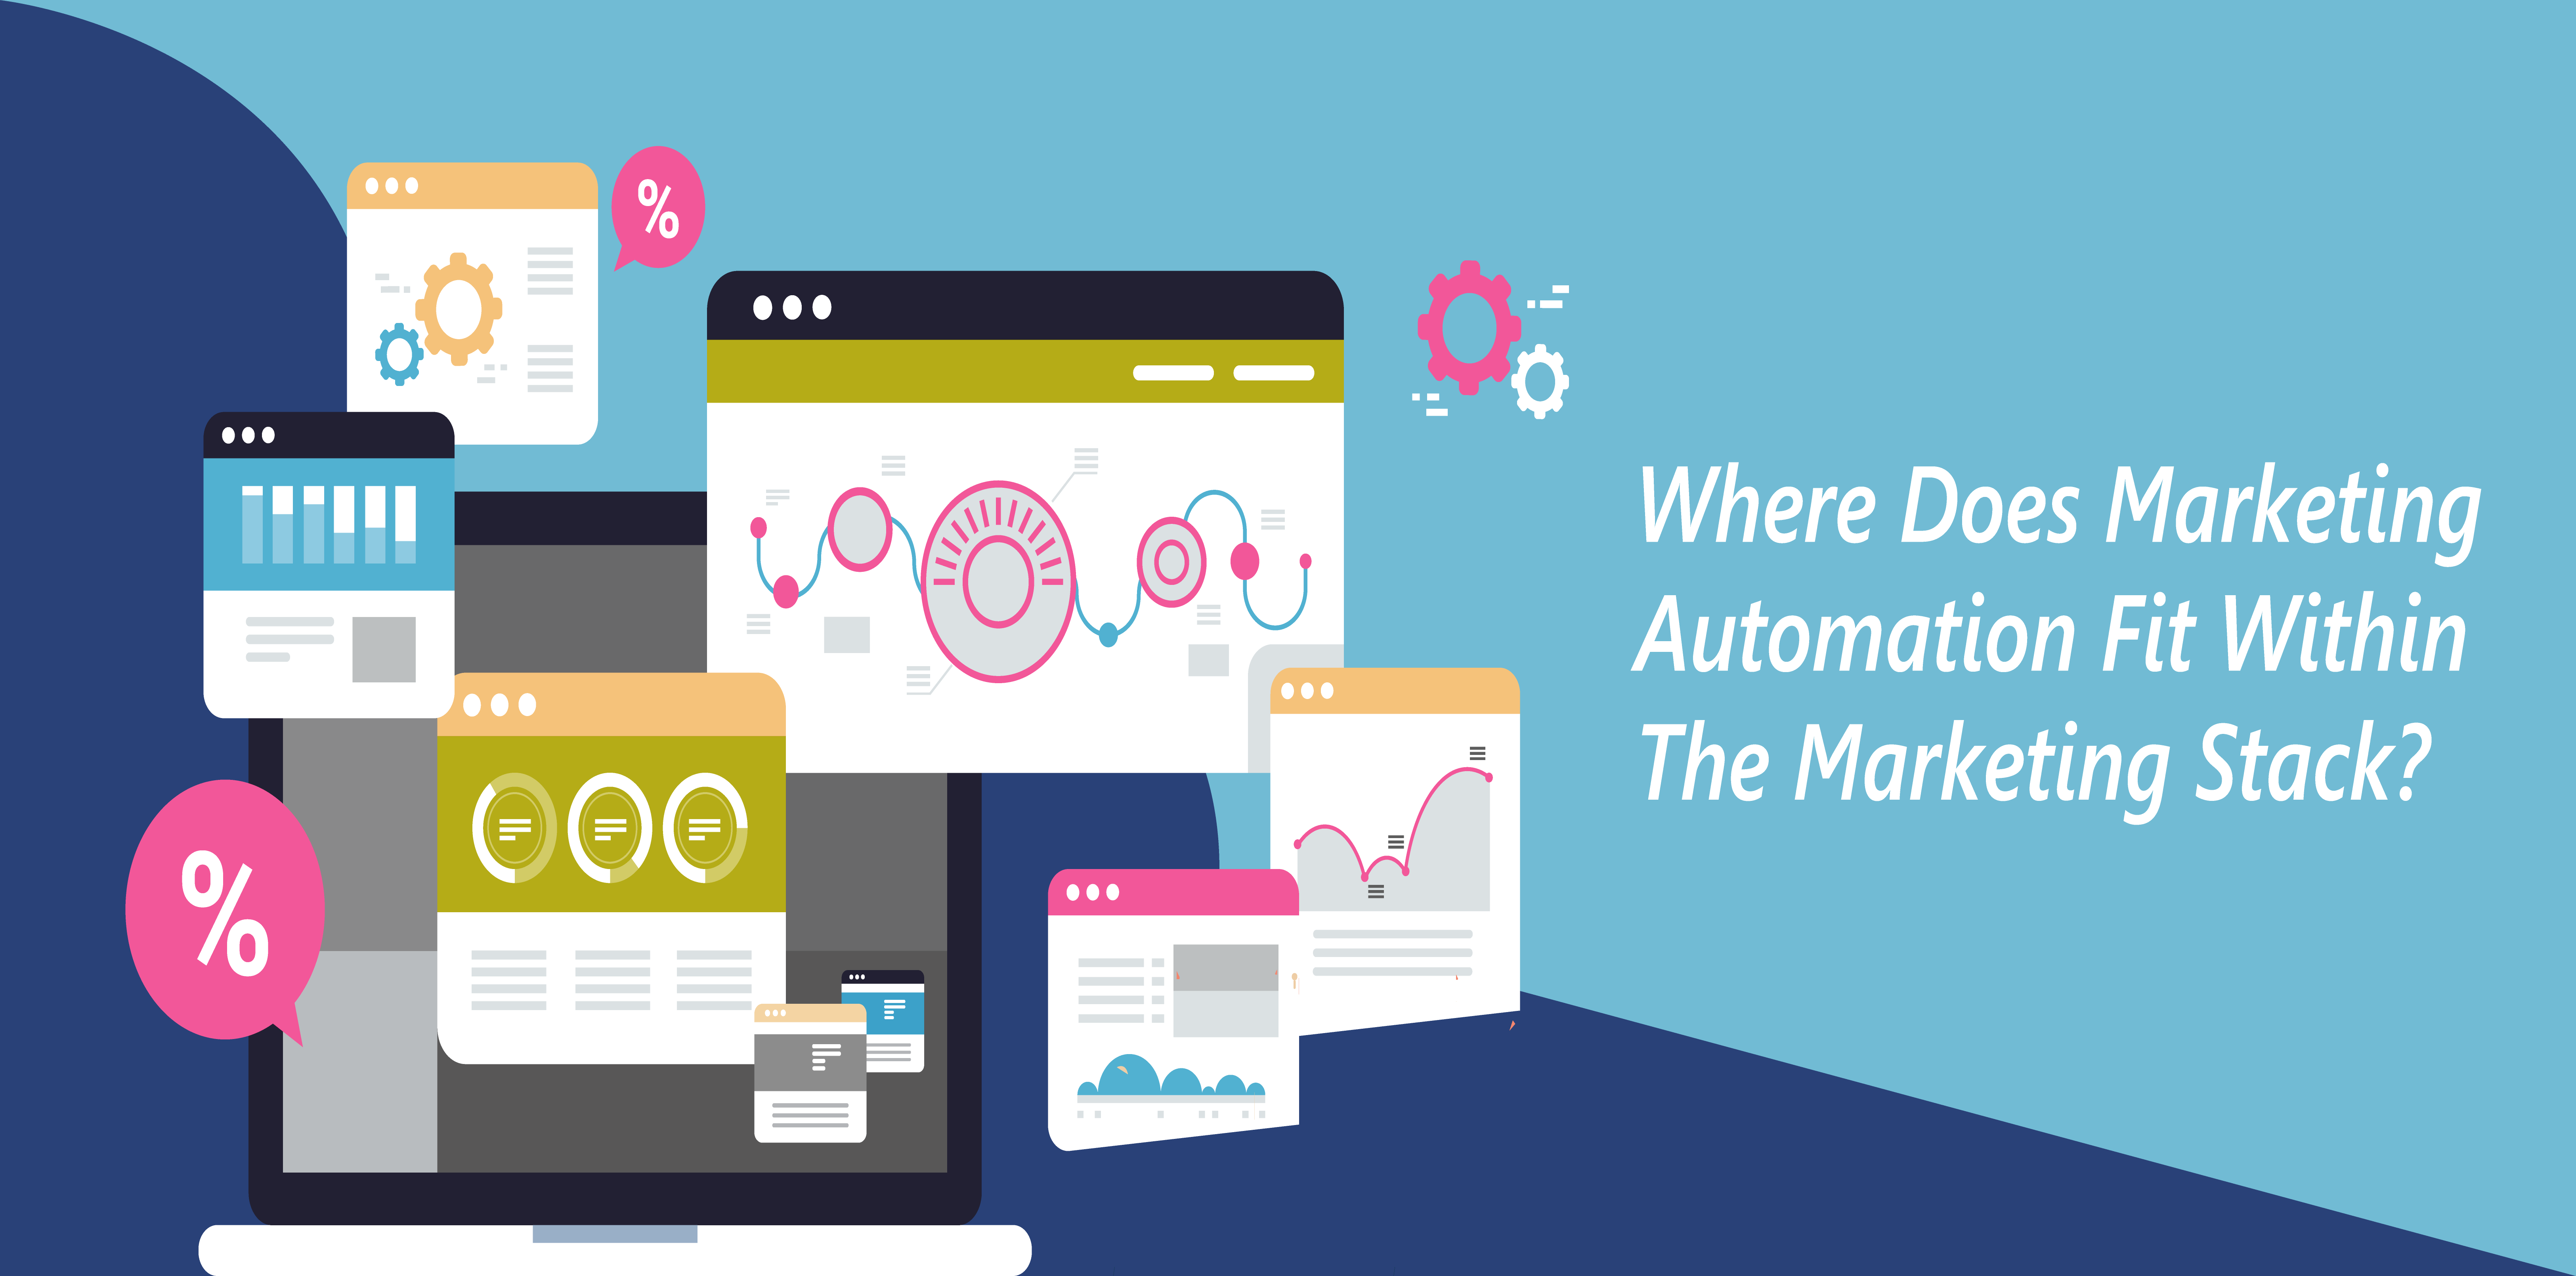 Here's Where Marketing Automation Fits in the Marketing Stack